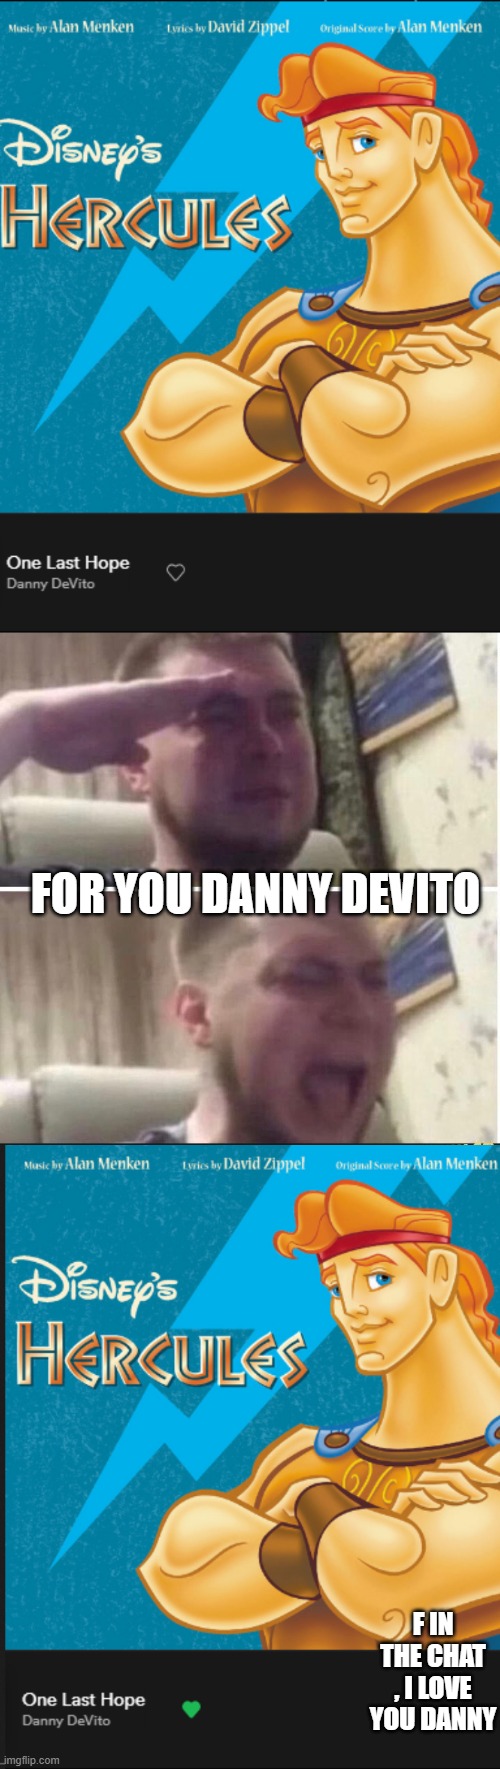  FOR YOU DANNY DEVITO; F IN THE CHAT , I LOVE YOU DANNY | image tagged in wow danny,crying salute,hercules,danny devito,oh wow are you actually reading these tags,wow | made w/ Imgflip meme maker